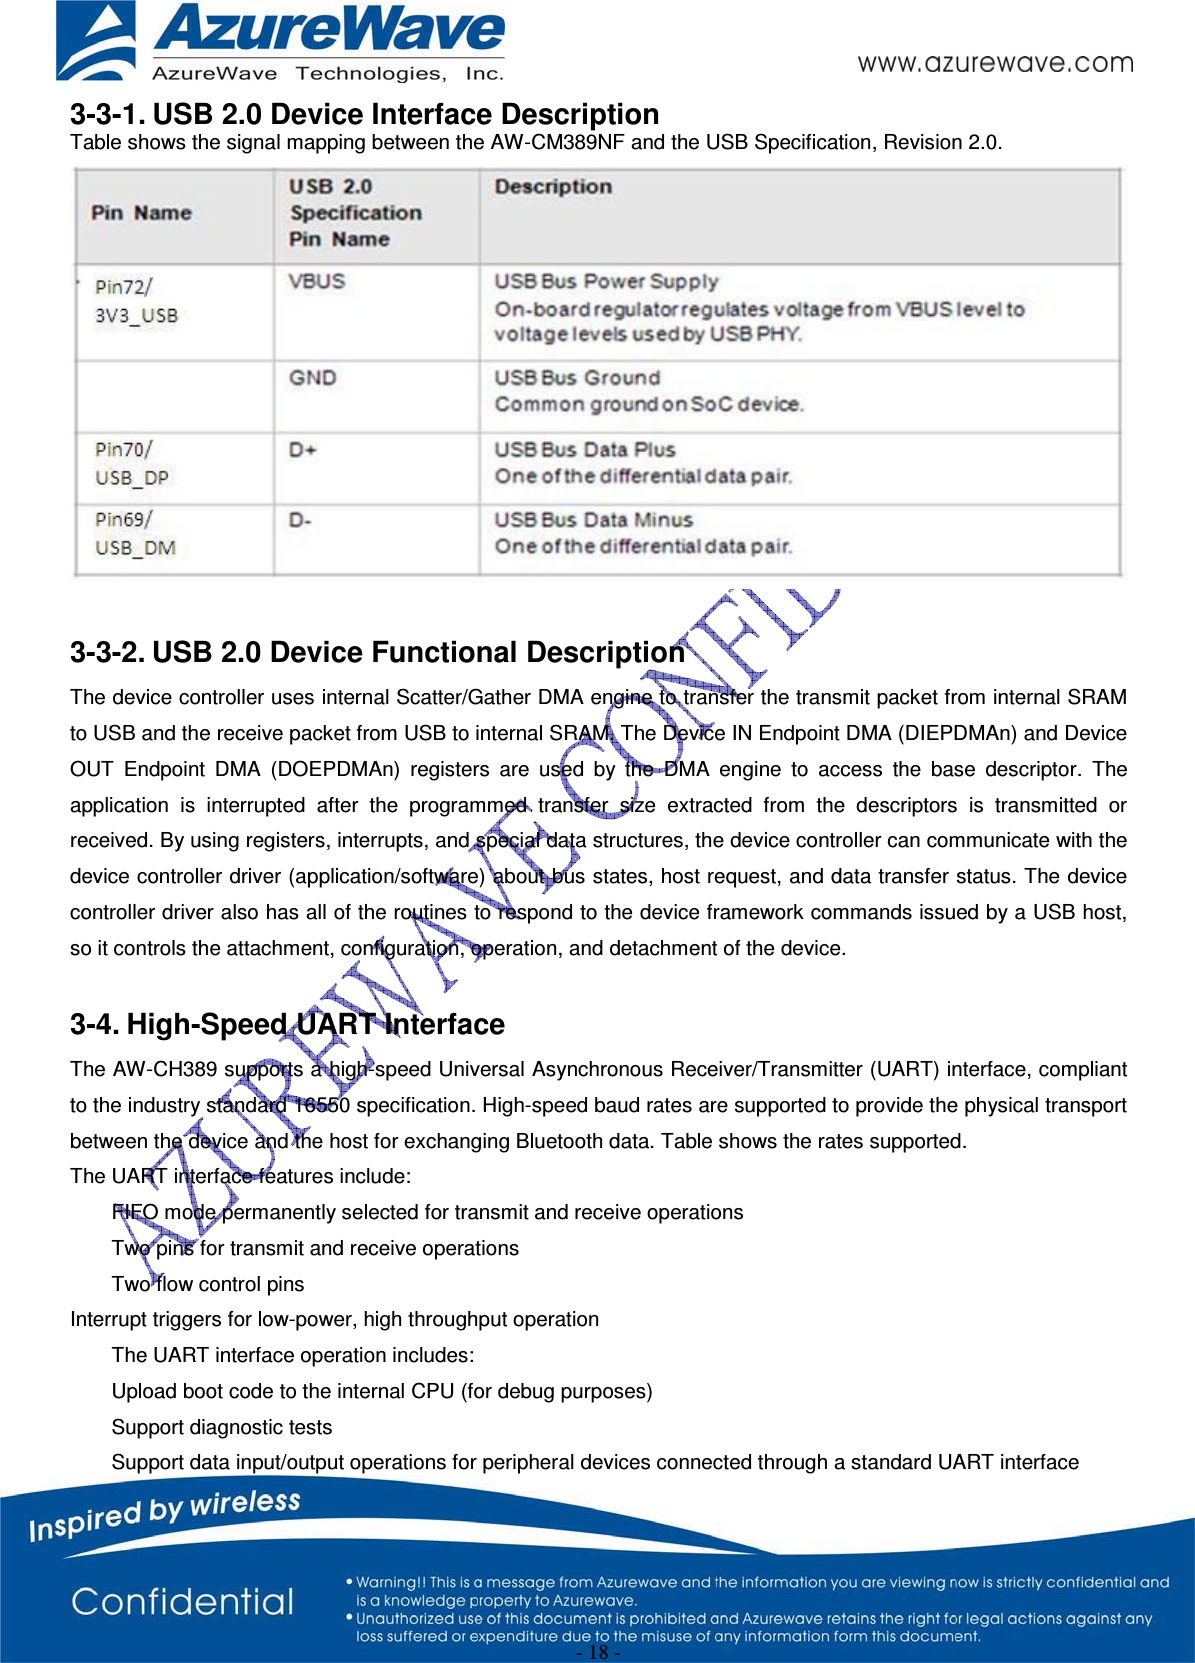 - 18 - 3-3-1. USB 2.0 Device Interface Description Table shows the signal mapping between the AW-CM389NF and the USB Specification, Revision 2.0. 3-3-2. USB 2.0 Device Functional Description The device controller uses internal Scatter/Gather DMA engine to transfer the transmit packet from internal SRAM to USB and the receive packet from USB to internal SRAM. The Device IN Endpoint DMA (DIEPDMAn) and Device OUT Endpoint DMA (DOEPDMAn) registers are used by the DMA engine to access the base descriptor. The application is interrupted after the programmed transfer size extracted from the descriptors is transmitted or received. By using registers, interrupts, and special data structures, the device controller can communicate with the device controller driver (application/software) about bus states, host request, and data transfer status. The device controller driver also has all of the routines to respond to the device framework commands issued by a USB host, so it controls the attachment, configuration, operation, and detachment of the device. 3-4. High-Speed UART Interface The AW-CH389 supports a high-speed Universal Asynchronous Receiver/Transmitter (UART) interface, compliant to the industry standard 16550 specification. High-speed baud rates are supported to provide the physical transport between the device and the host for exchanging Bluetooth data. Table shows the rates supported. The UART interface features include: FIFO mode permanently selected for transmit and receive operations Two pins for transmit and receive operations Two flow control pins Interrupt triggers for low-power, high throughput operation The UART interface operation includes: Upload boot code to the internal CPU (for debug purposes) Support diagnostic tests Support data input/output operations for peripheral devices connected through a standard UART interface 